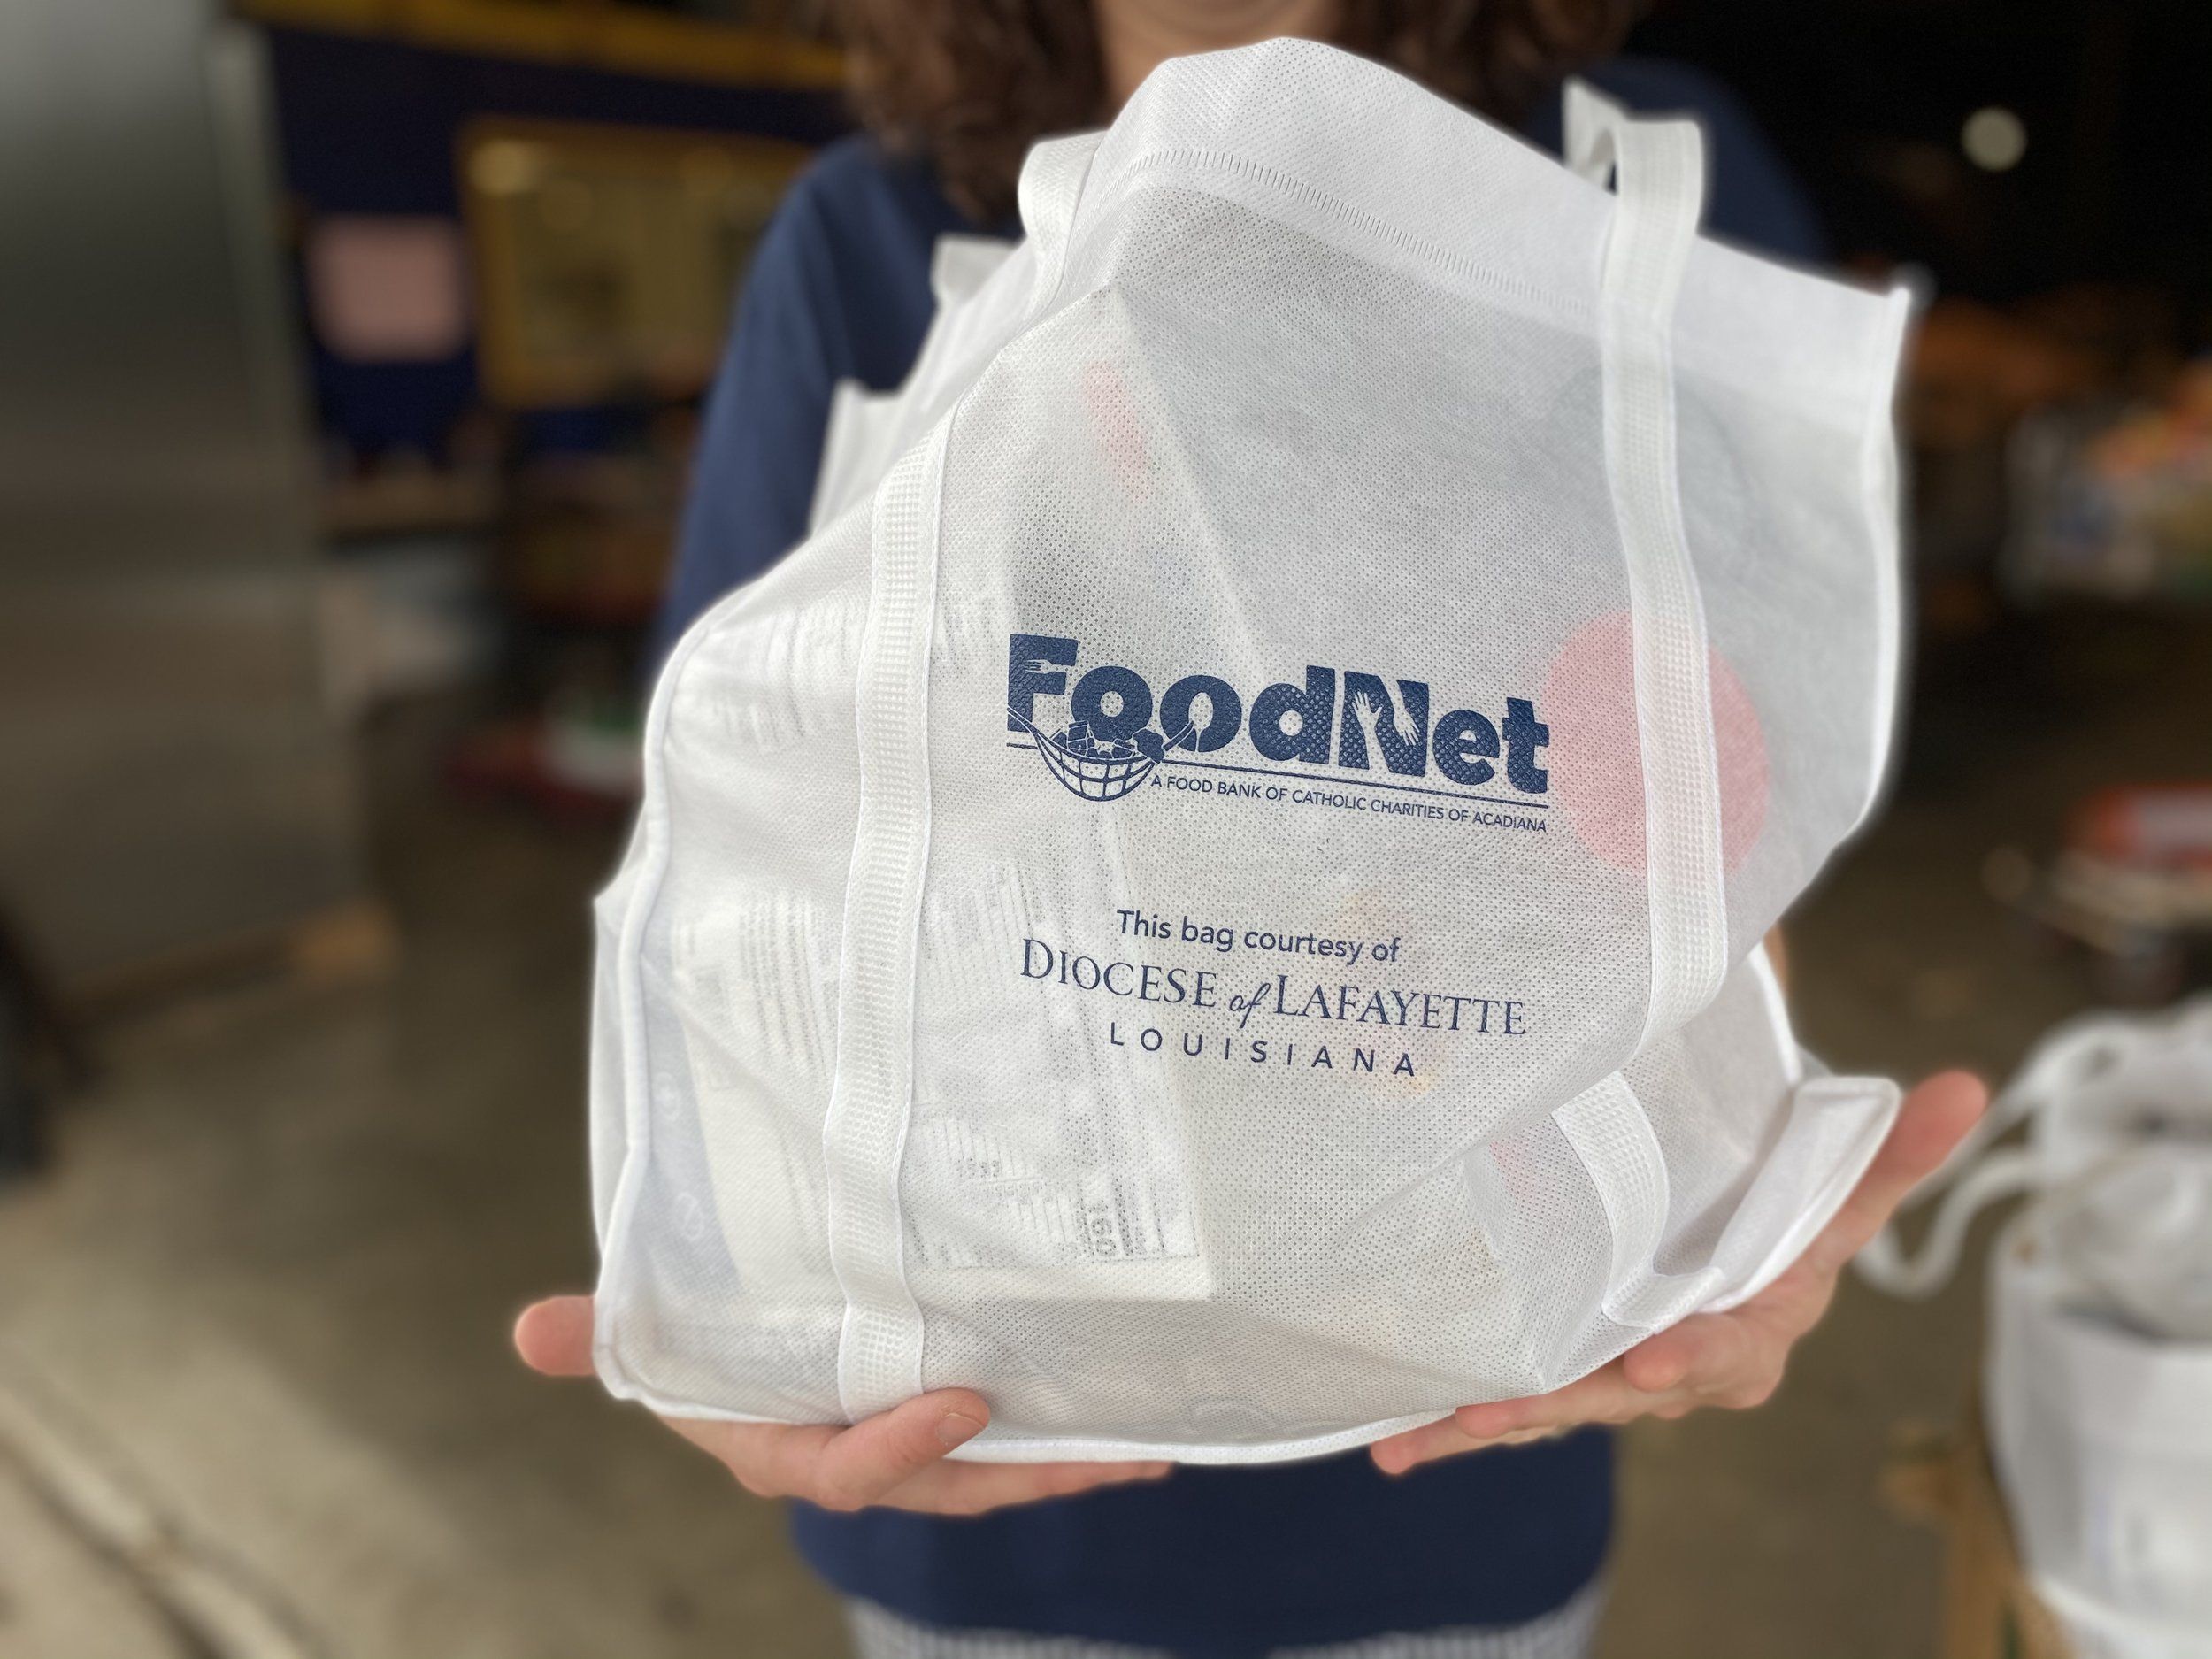 Foodnet The Greater Acadiana Food Bank